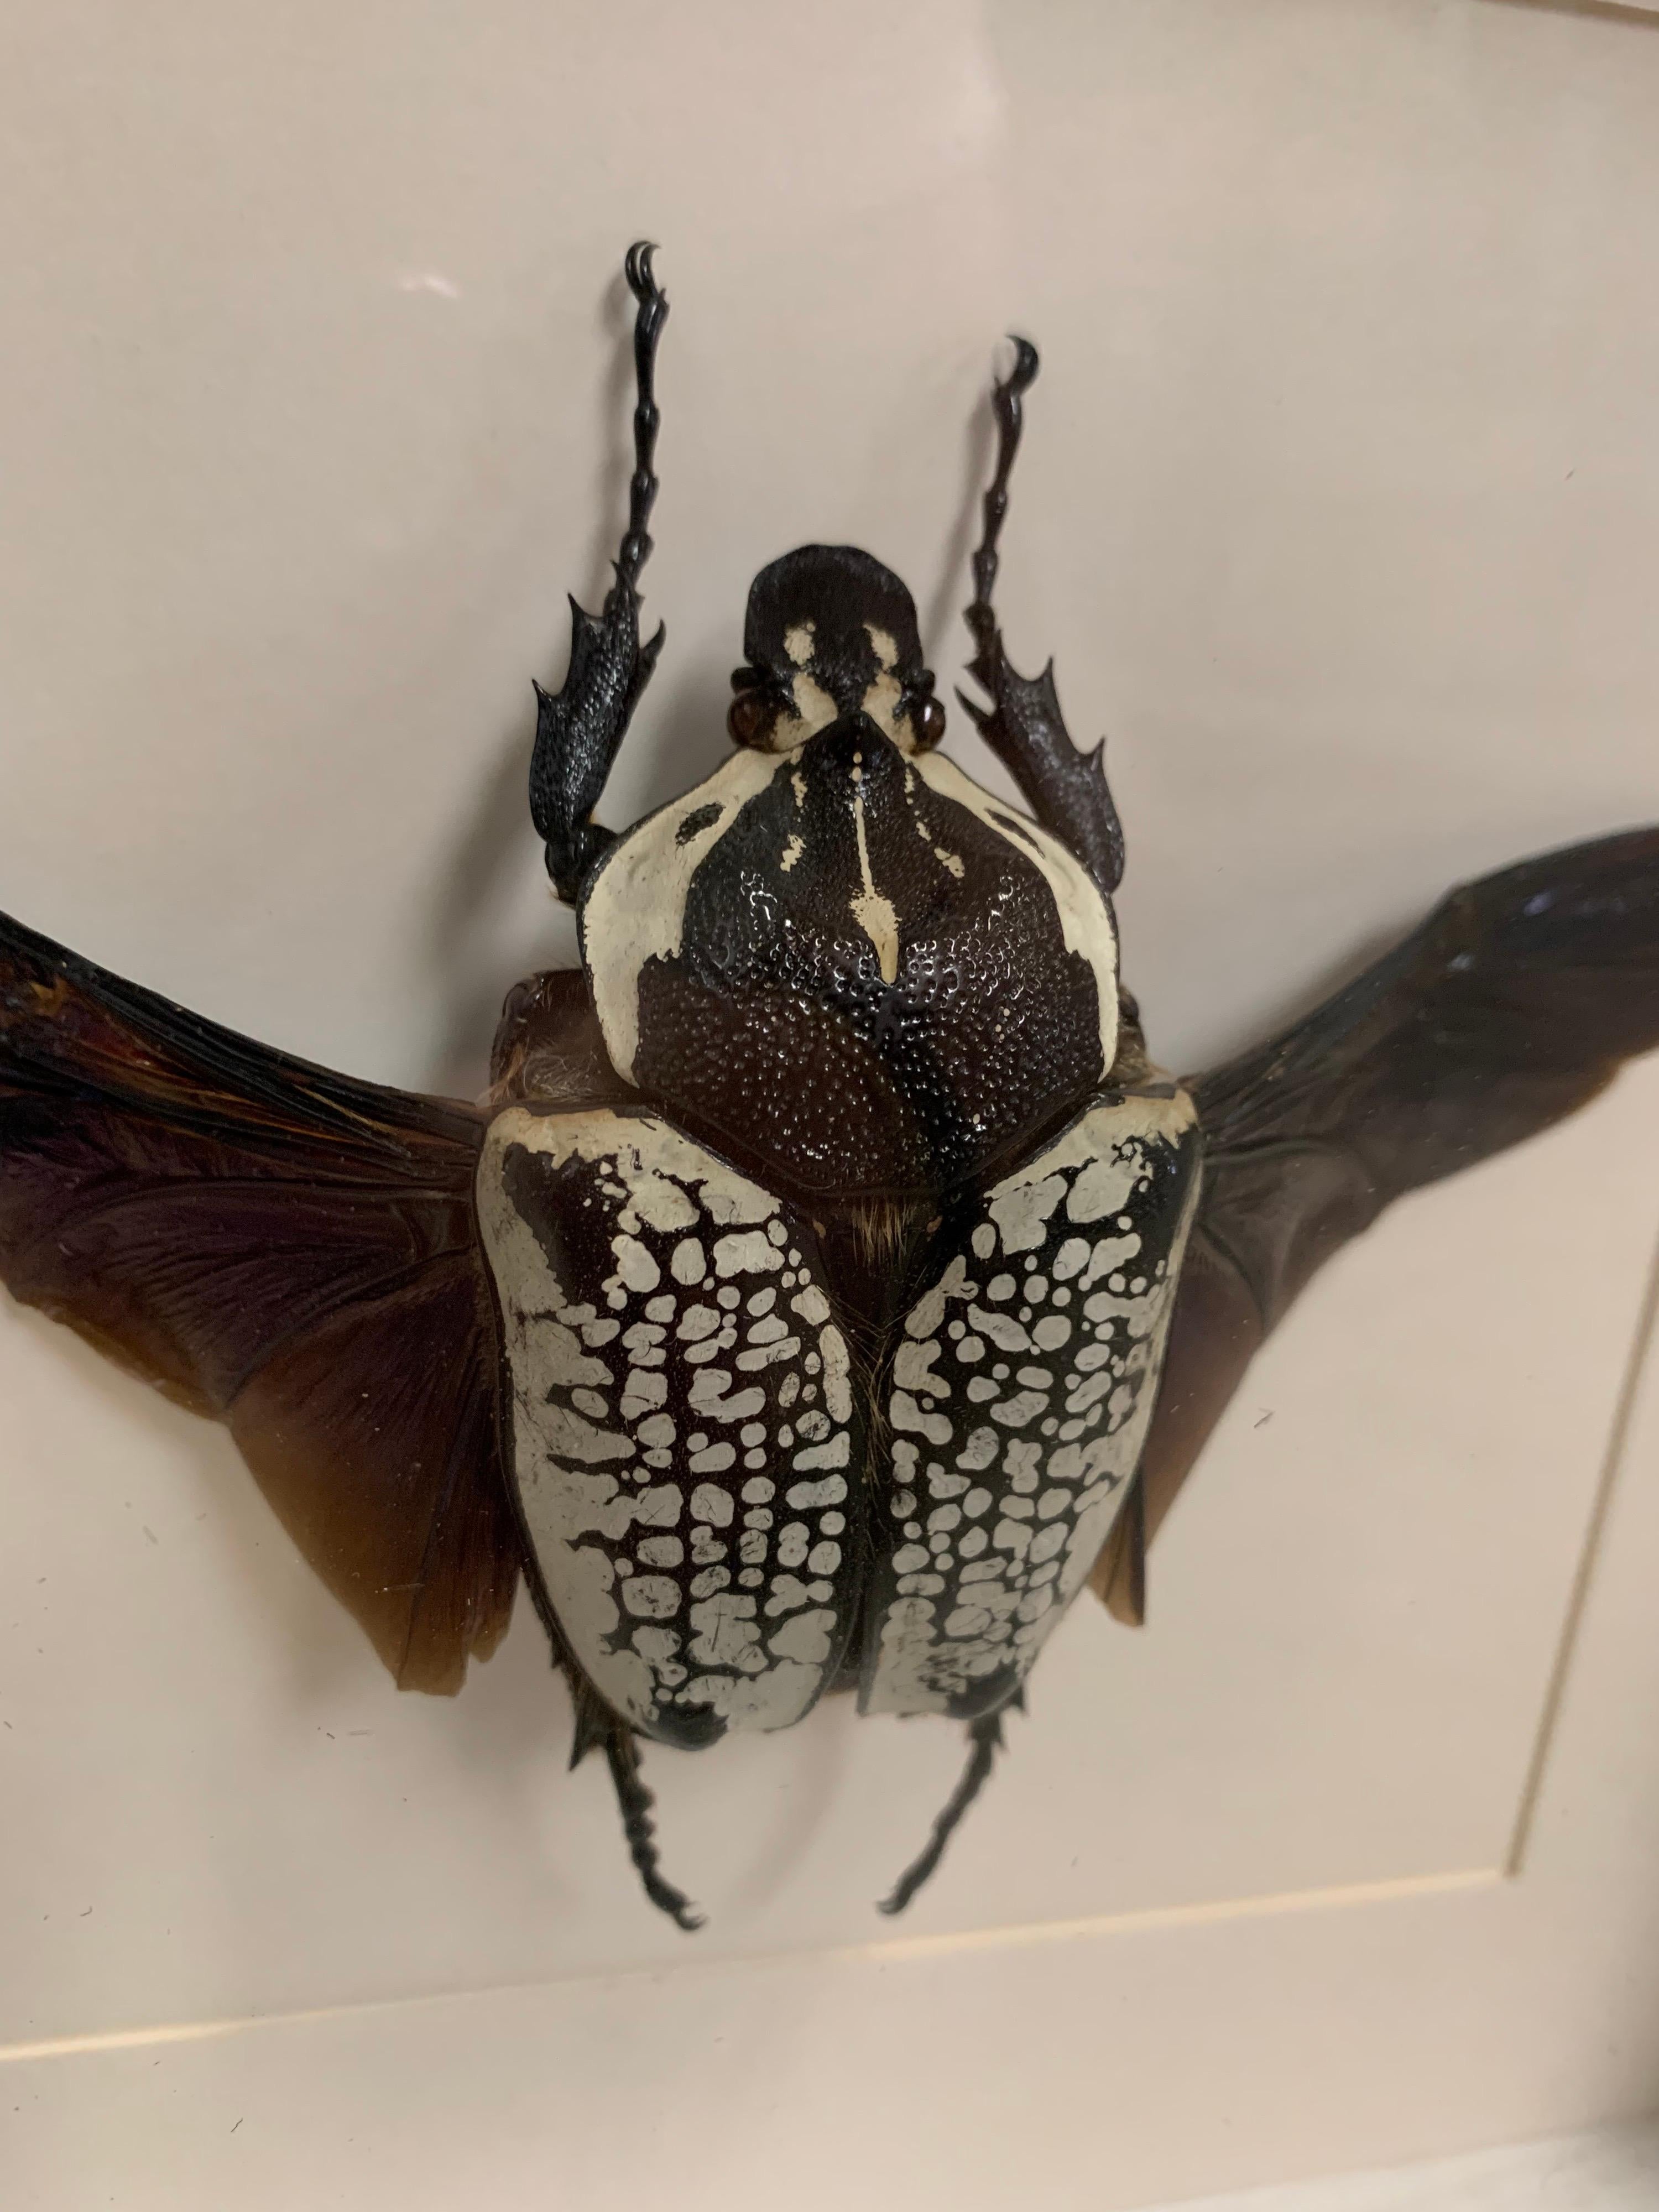 Very nice piece this giant beetle, Goliath Beetle (Latin: Goliathus goliathus) which has been skilfully prepared in flying position. The details are absolutely stunning. The glass and wood case can be hanged or placed like a picture stand.

The